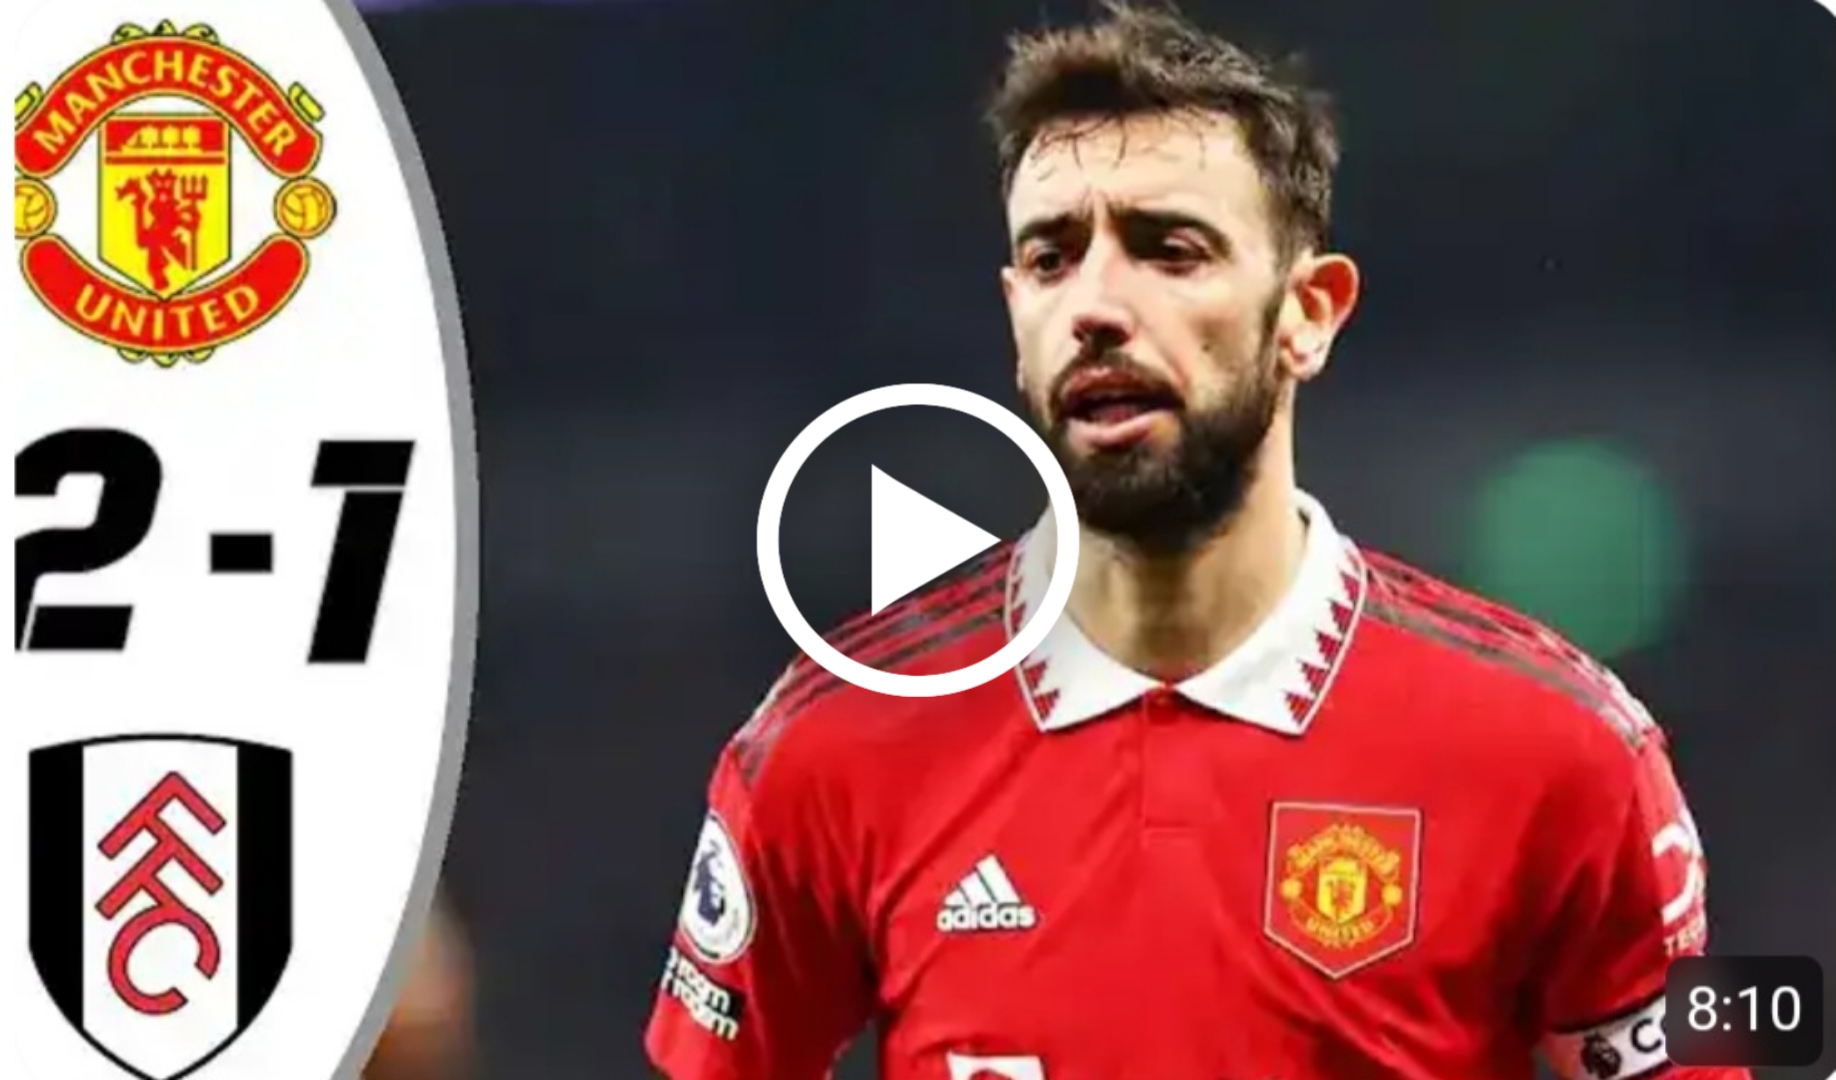 (Video) Watch: Manchester United vs Fulham (2-1) | All Goals & Extended Highlights | Premier League 2022/23 1 Sportelo